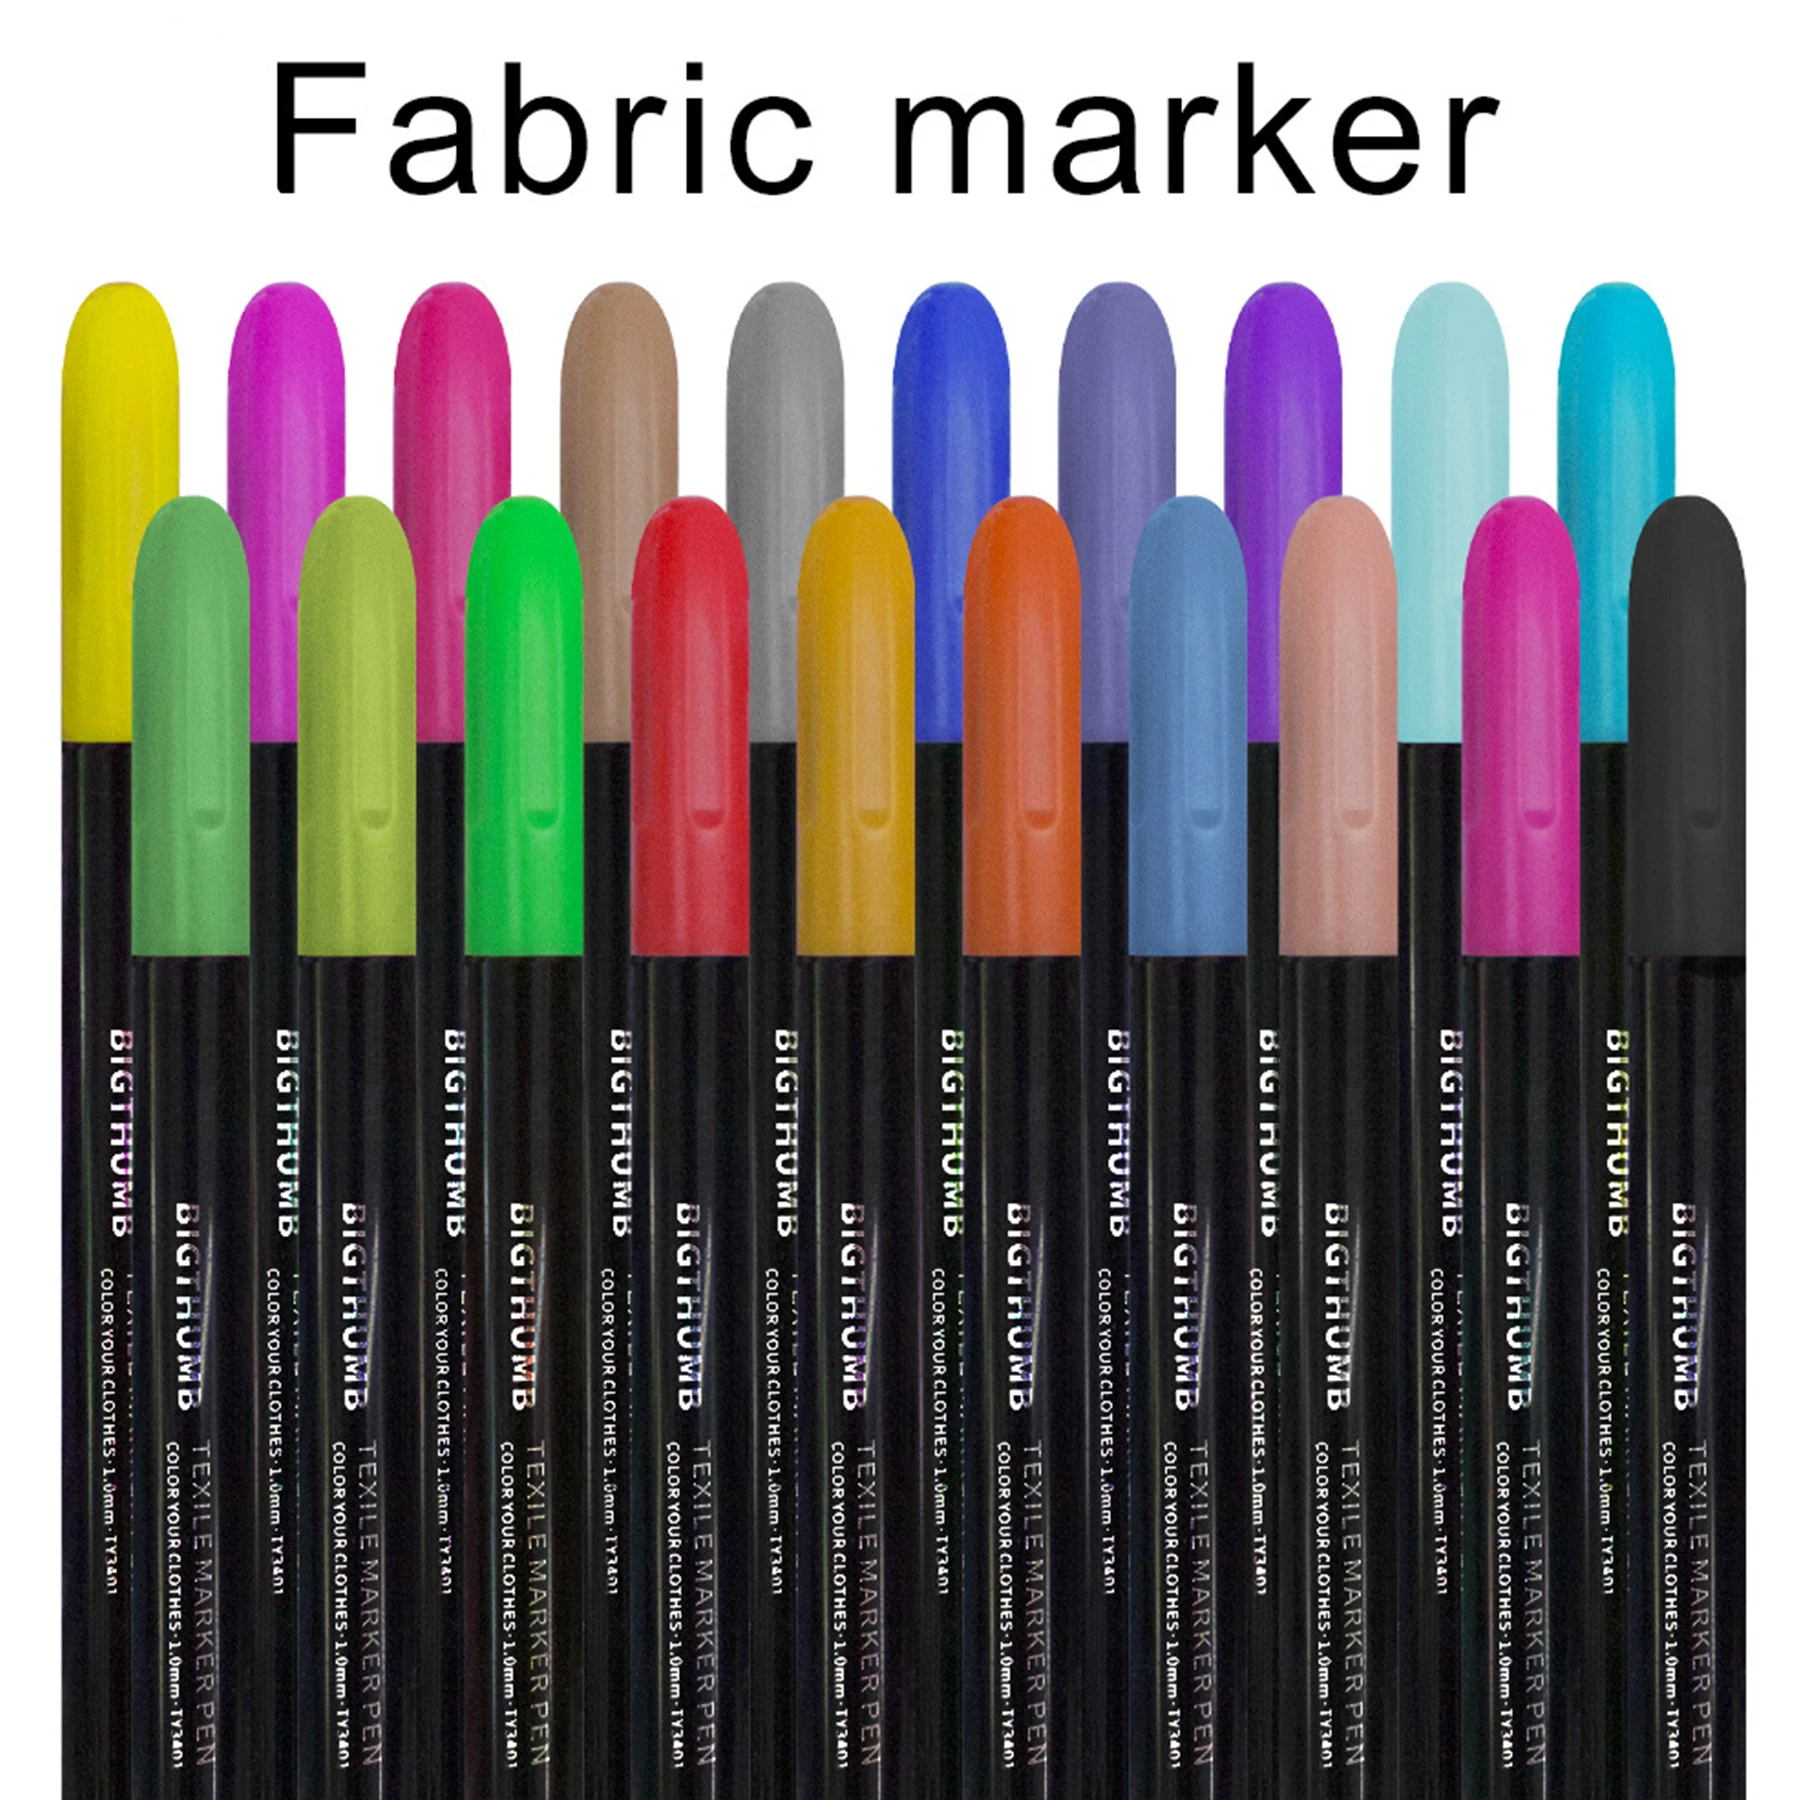 https://ae01.alicdn.com/kf/S3deaa493e5ec40459779bcc3b14ea445e/Fabric-Markers-Permanent-for-Clothes-Fabric-Pens-Permanent-No-Bleed-Fine-Tip-Fabric-Paint-Pens-Paint.jpg